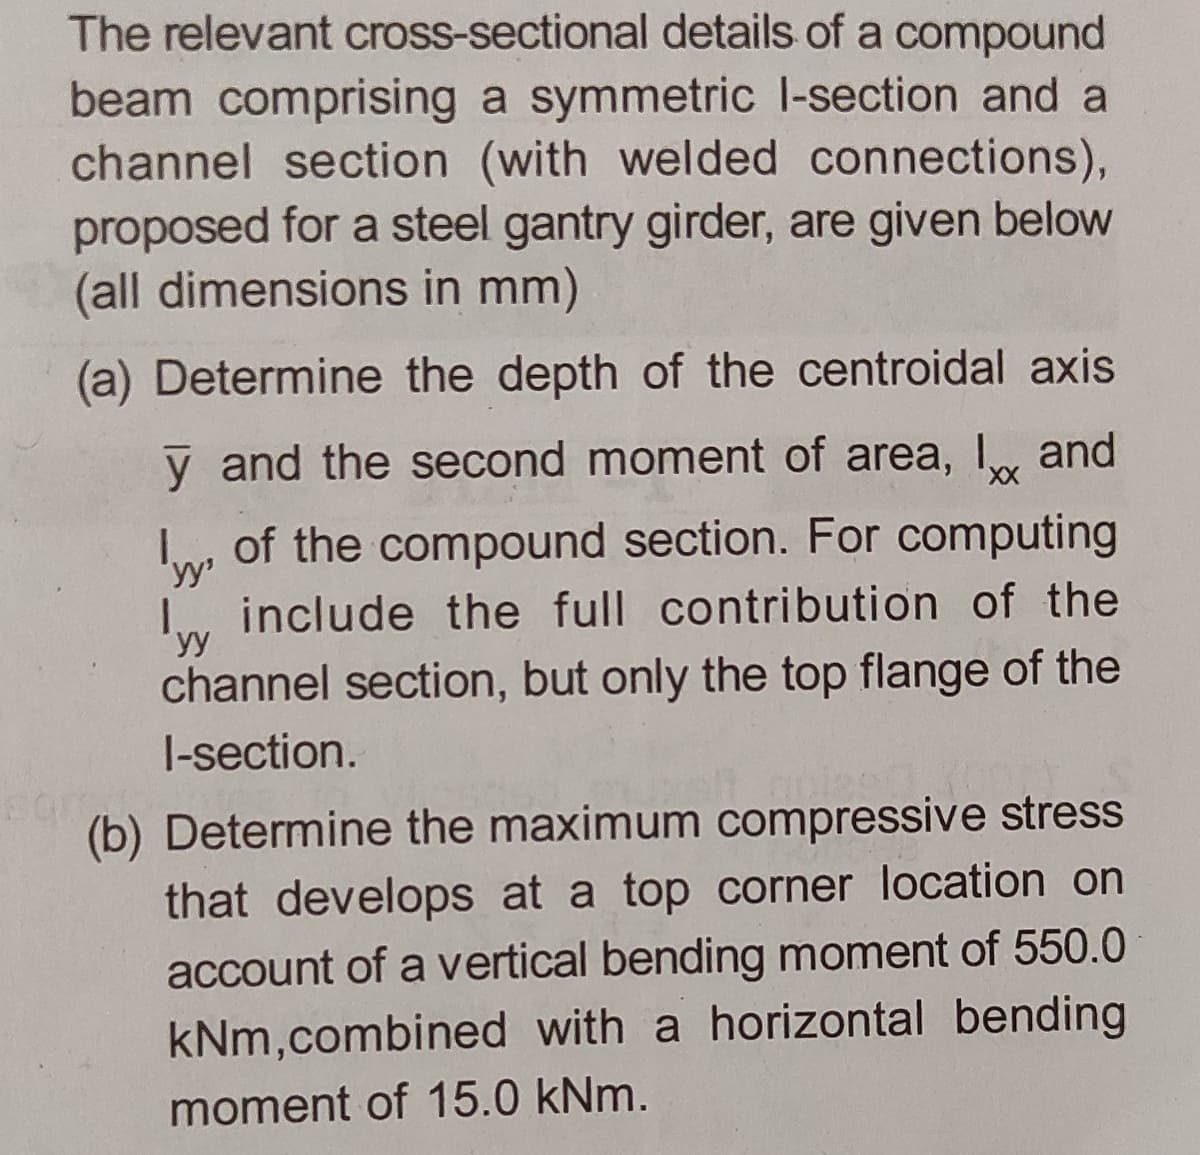 The relevant cross-sectional details of a compound
beam comprising a symmetric l-section and a
channel section (with welded connections),
proposed for a steel gantry girder, are given below
(all dimensions in mm)
(a) Determine the depth of the centroidal axis
y and the second moment of area, I and
I, of the compound section. For computing
include the full contribution of the
yy
channel section, but only the top flange of the
I-section.
(b) Determine the maximum compressive stress
that develops at a top corner location on
account of a vertical bending moment of 550.0
kNm,combined with a horizontal bending
moment of 15.0 kNm.
